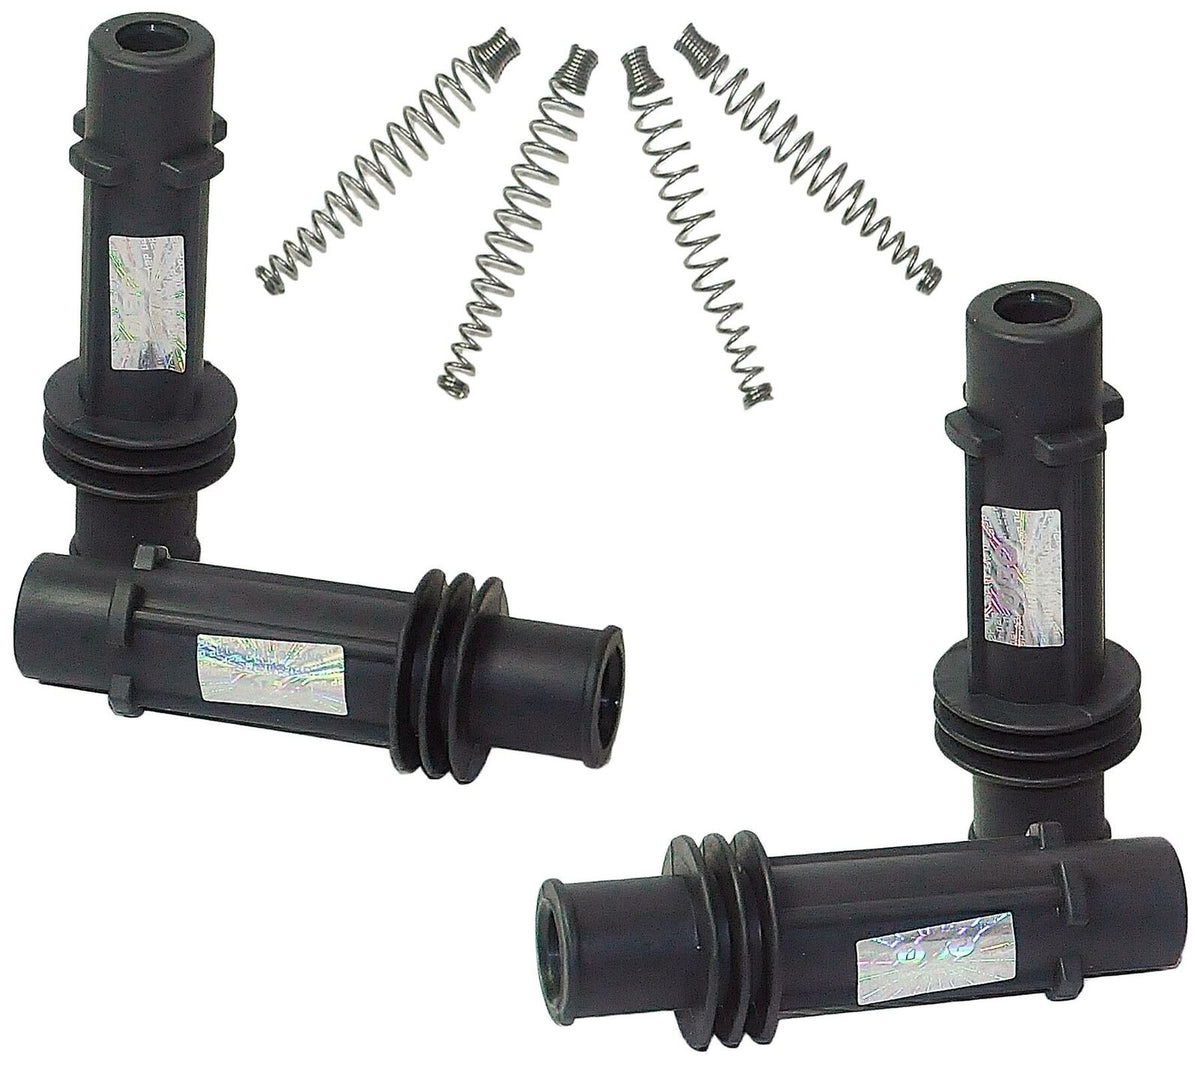 Ignition Coil Repair Kit For Cheverolet Aveo, Orlando, Trax, Volt